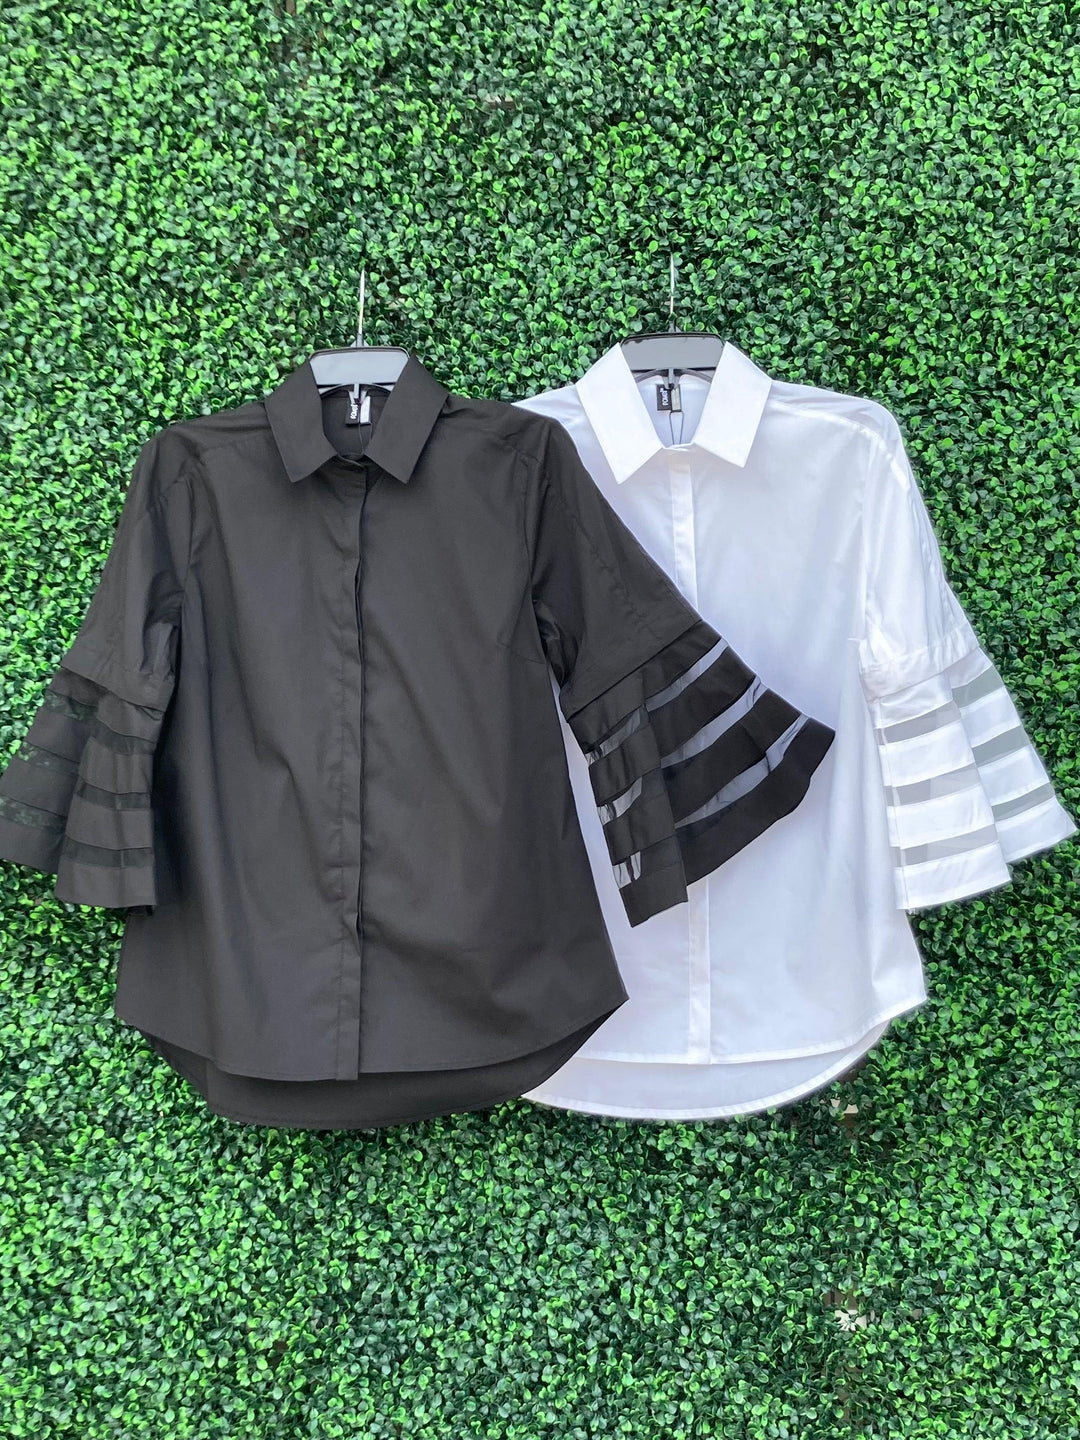 White and black bell sleeve tops with sheer panels